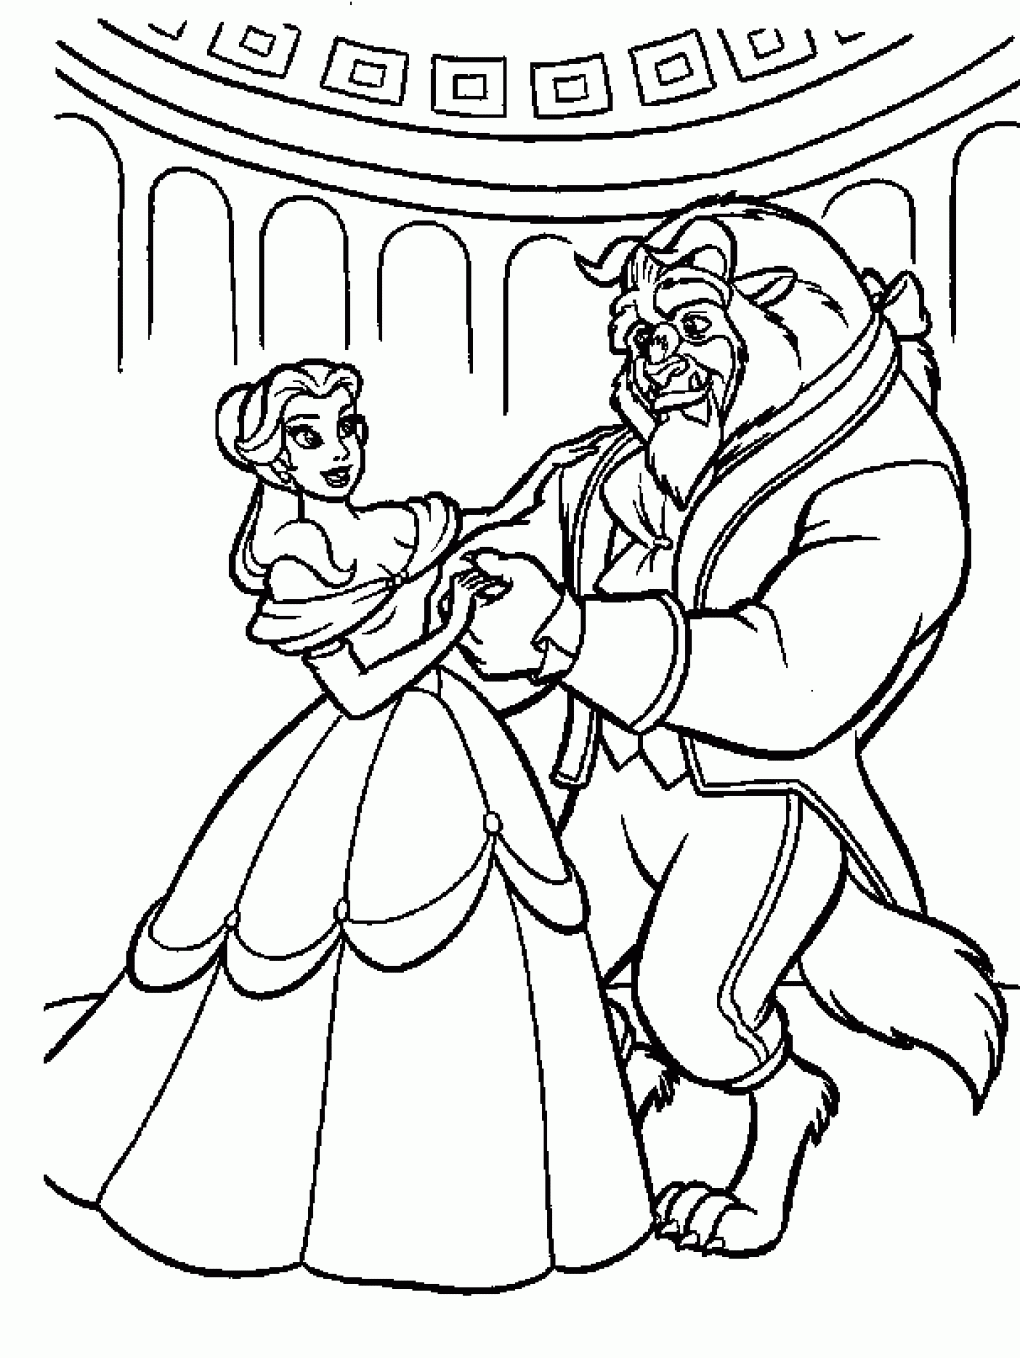 beauty and the beast coloring pages beauty and the beast coloring pages 2 disneyclipscom pages the beauty coloring and beast 